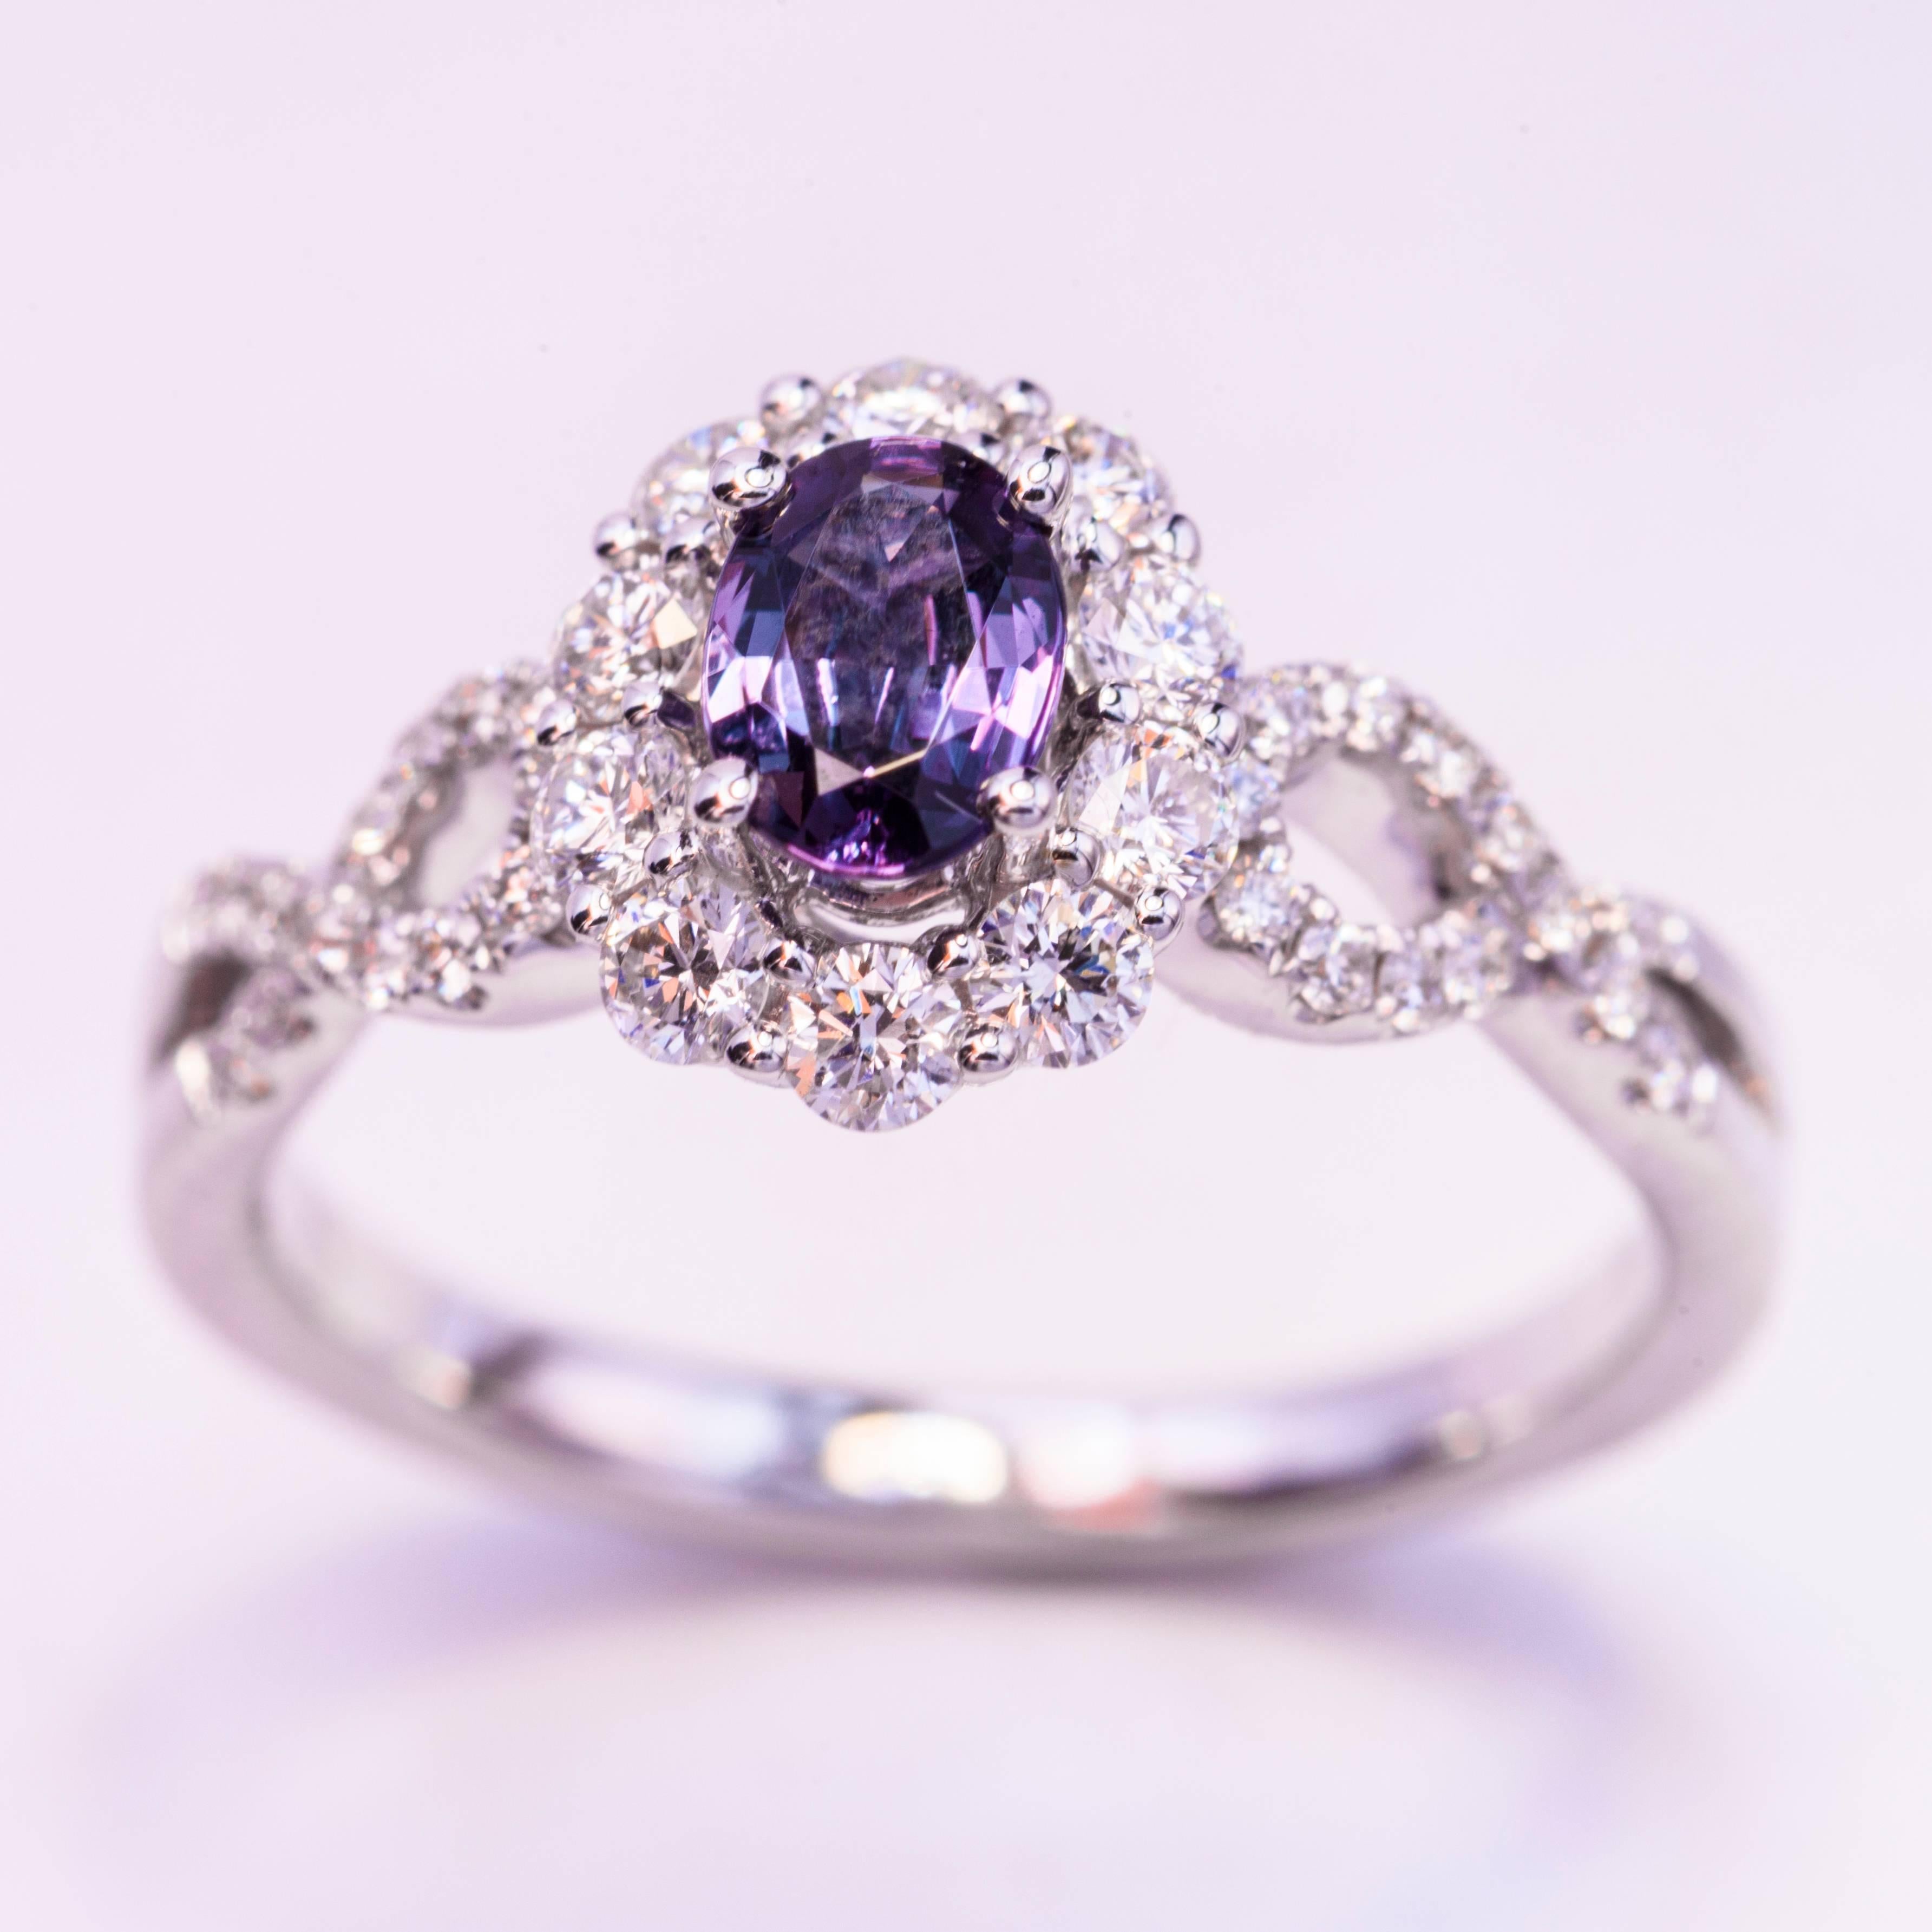 18 K white Gold Ring 
Alexandrite Gem stone weight: 0.51 Cts.
Diamond Weight: 0.62 cts.
CC Certificate Available 